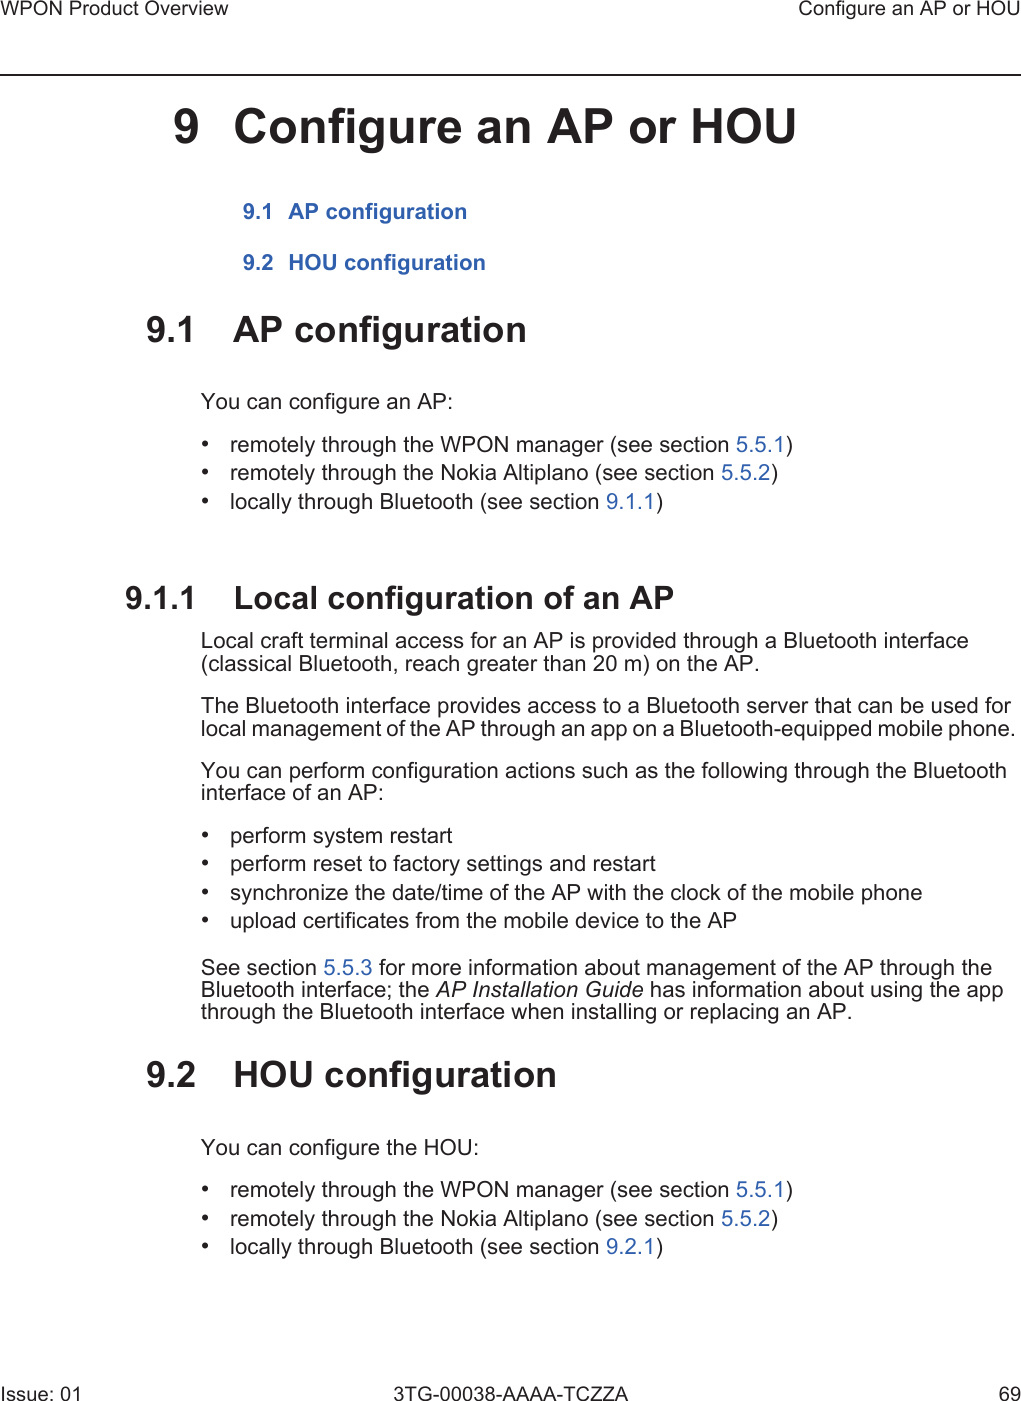 WPON Product Overview Configure an AP or HOUIssue: 01 3TG-00038-AAAA-TCZZA 699 Configure an AP or HOU9.1 AP configuration9.2 HOU configuration9.1 AP configurationYou can configure an AP:•remotely through the WPON manager (see section 5.5.1)•remotely through the Nokia Altiplano (see section 5.5.2)•locally through Bluetooth (see section 9.1.1)9.1.1 Local configuration of an APLocal craft terminal access for an AP is provided through a Bluetooth interface (classical Bluetooth, reach greater than 20 m) on the AP.The Bluetooth interface provides access to a Bluetooth server that can be used for local management of the AP through an app on a Bluetooth-equipped mobile phone. You can perform configuration actions such as the following through the Bluetooth interface of an AP:•perform system restart•perform reset to factory settings and restart•synchronize the date/time of the AP with the clock of the mobile phone•upload certificates from the mobile device to the APSee section 5.5.3 for more information about management of the AP through the Bluetooth interface; the AP Installation Guide has information about using the app through the Bluetooth interface when installing or replacing an AP.9.2 HOU configurationYou can configure the HOU:•remotely through the WPON manager (see section 5.5.1)•remotely through the Nokia Altiplano (see section 5.5.2)•locally through Bluetooth (see section 9.2.1)